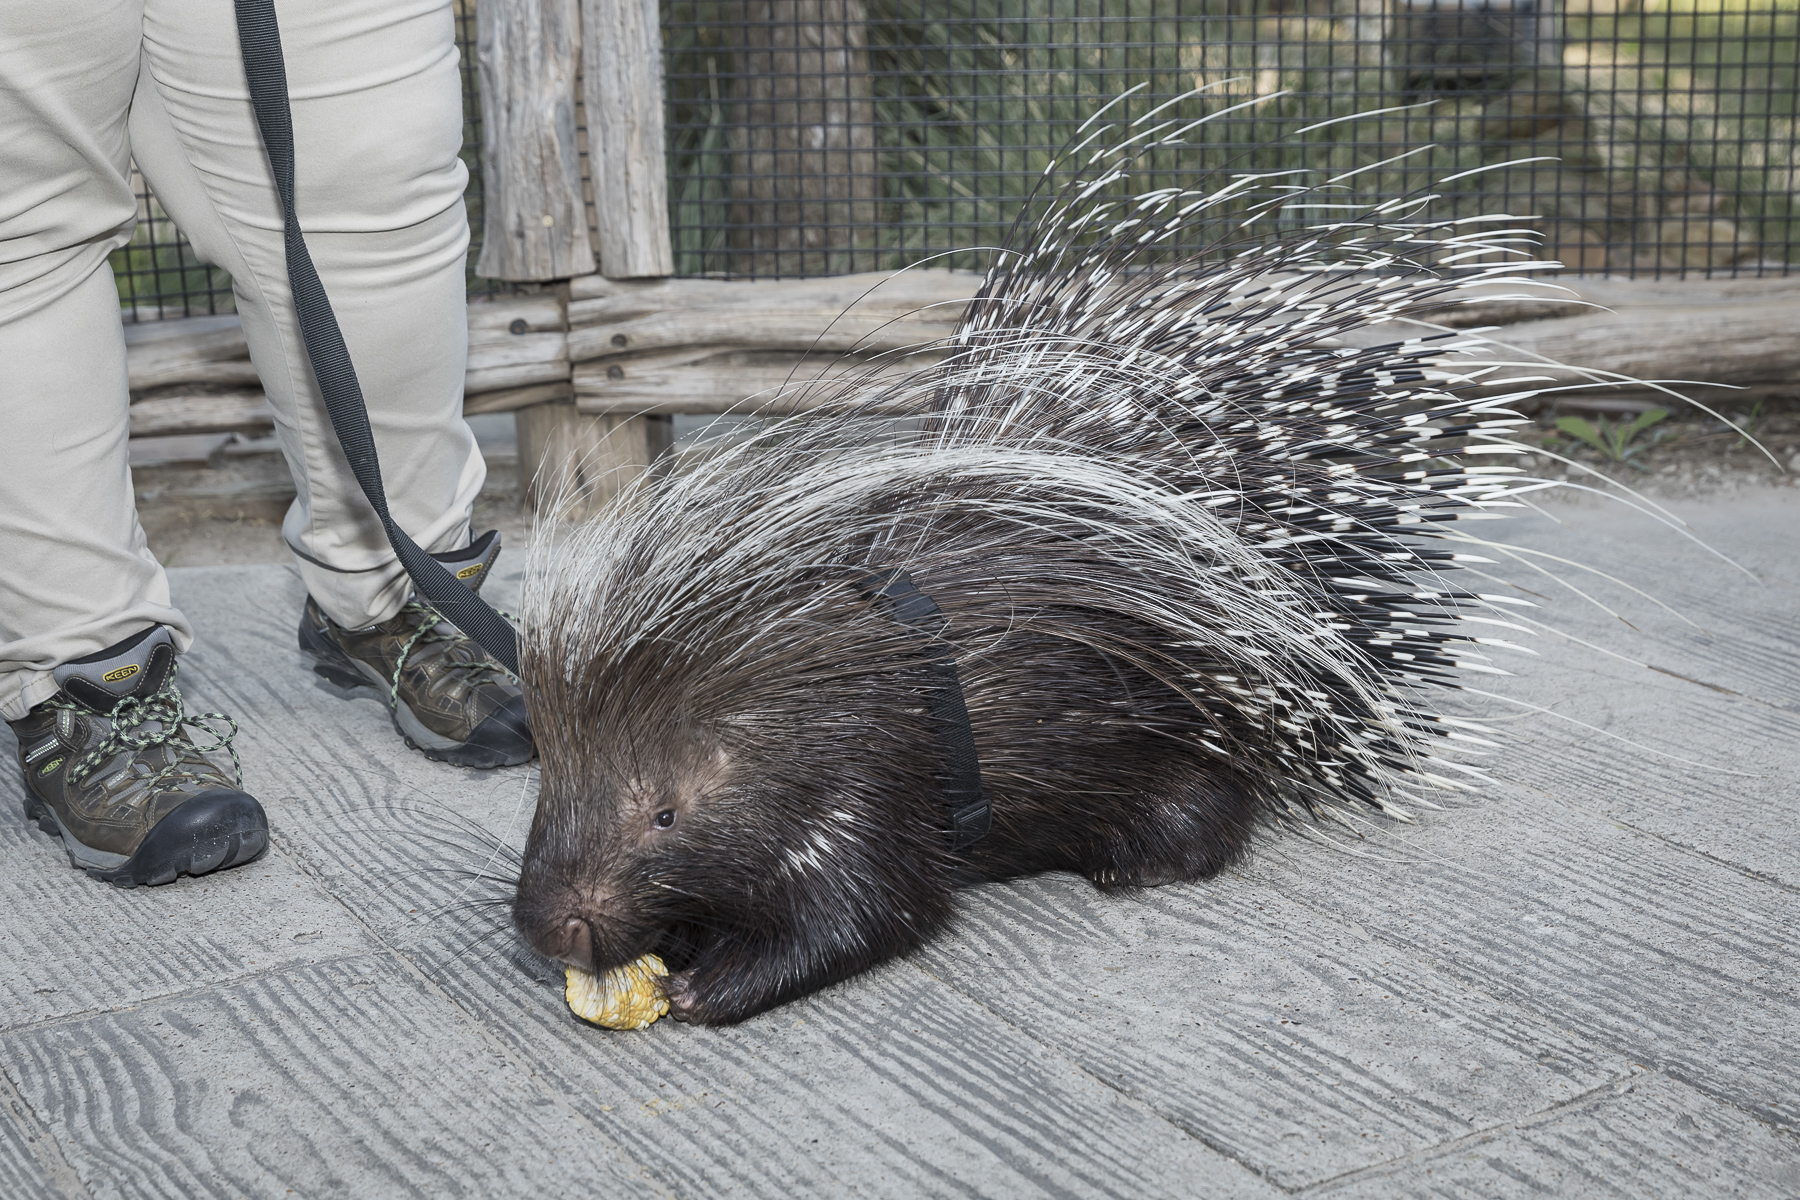 African crested porcupine nibbles on corn.